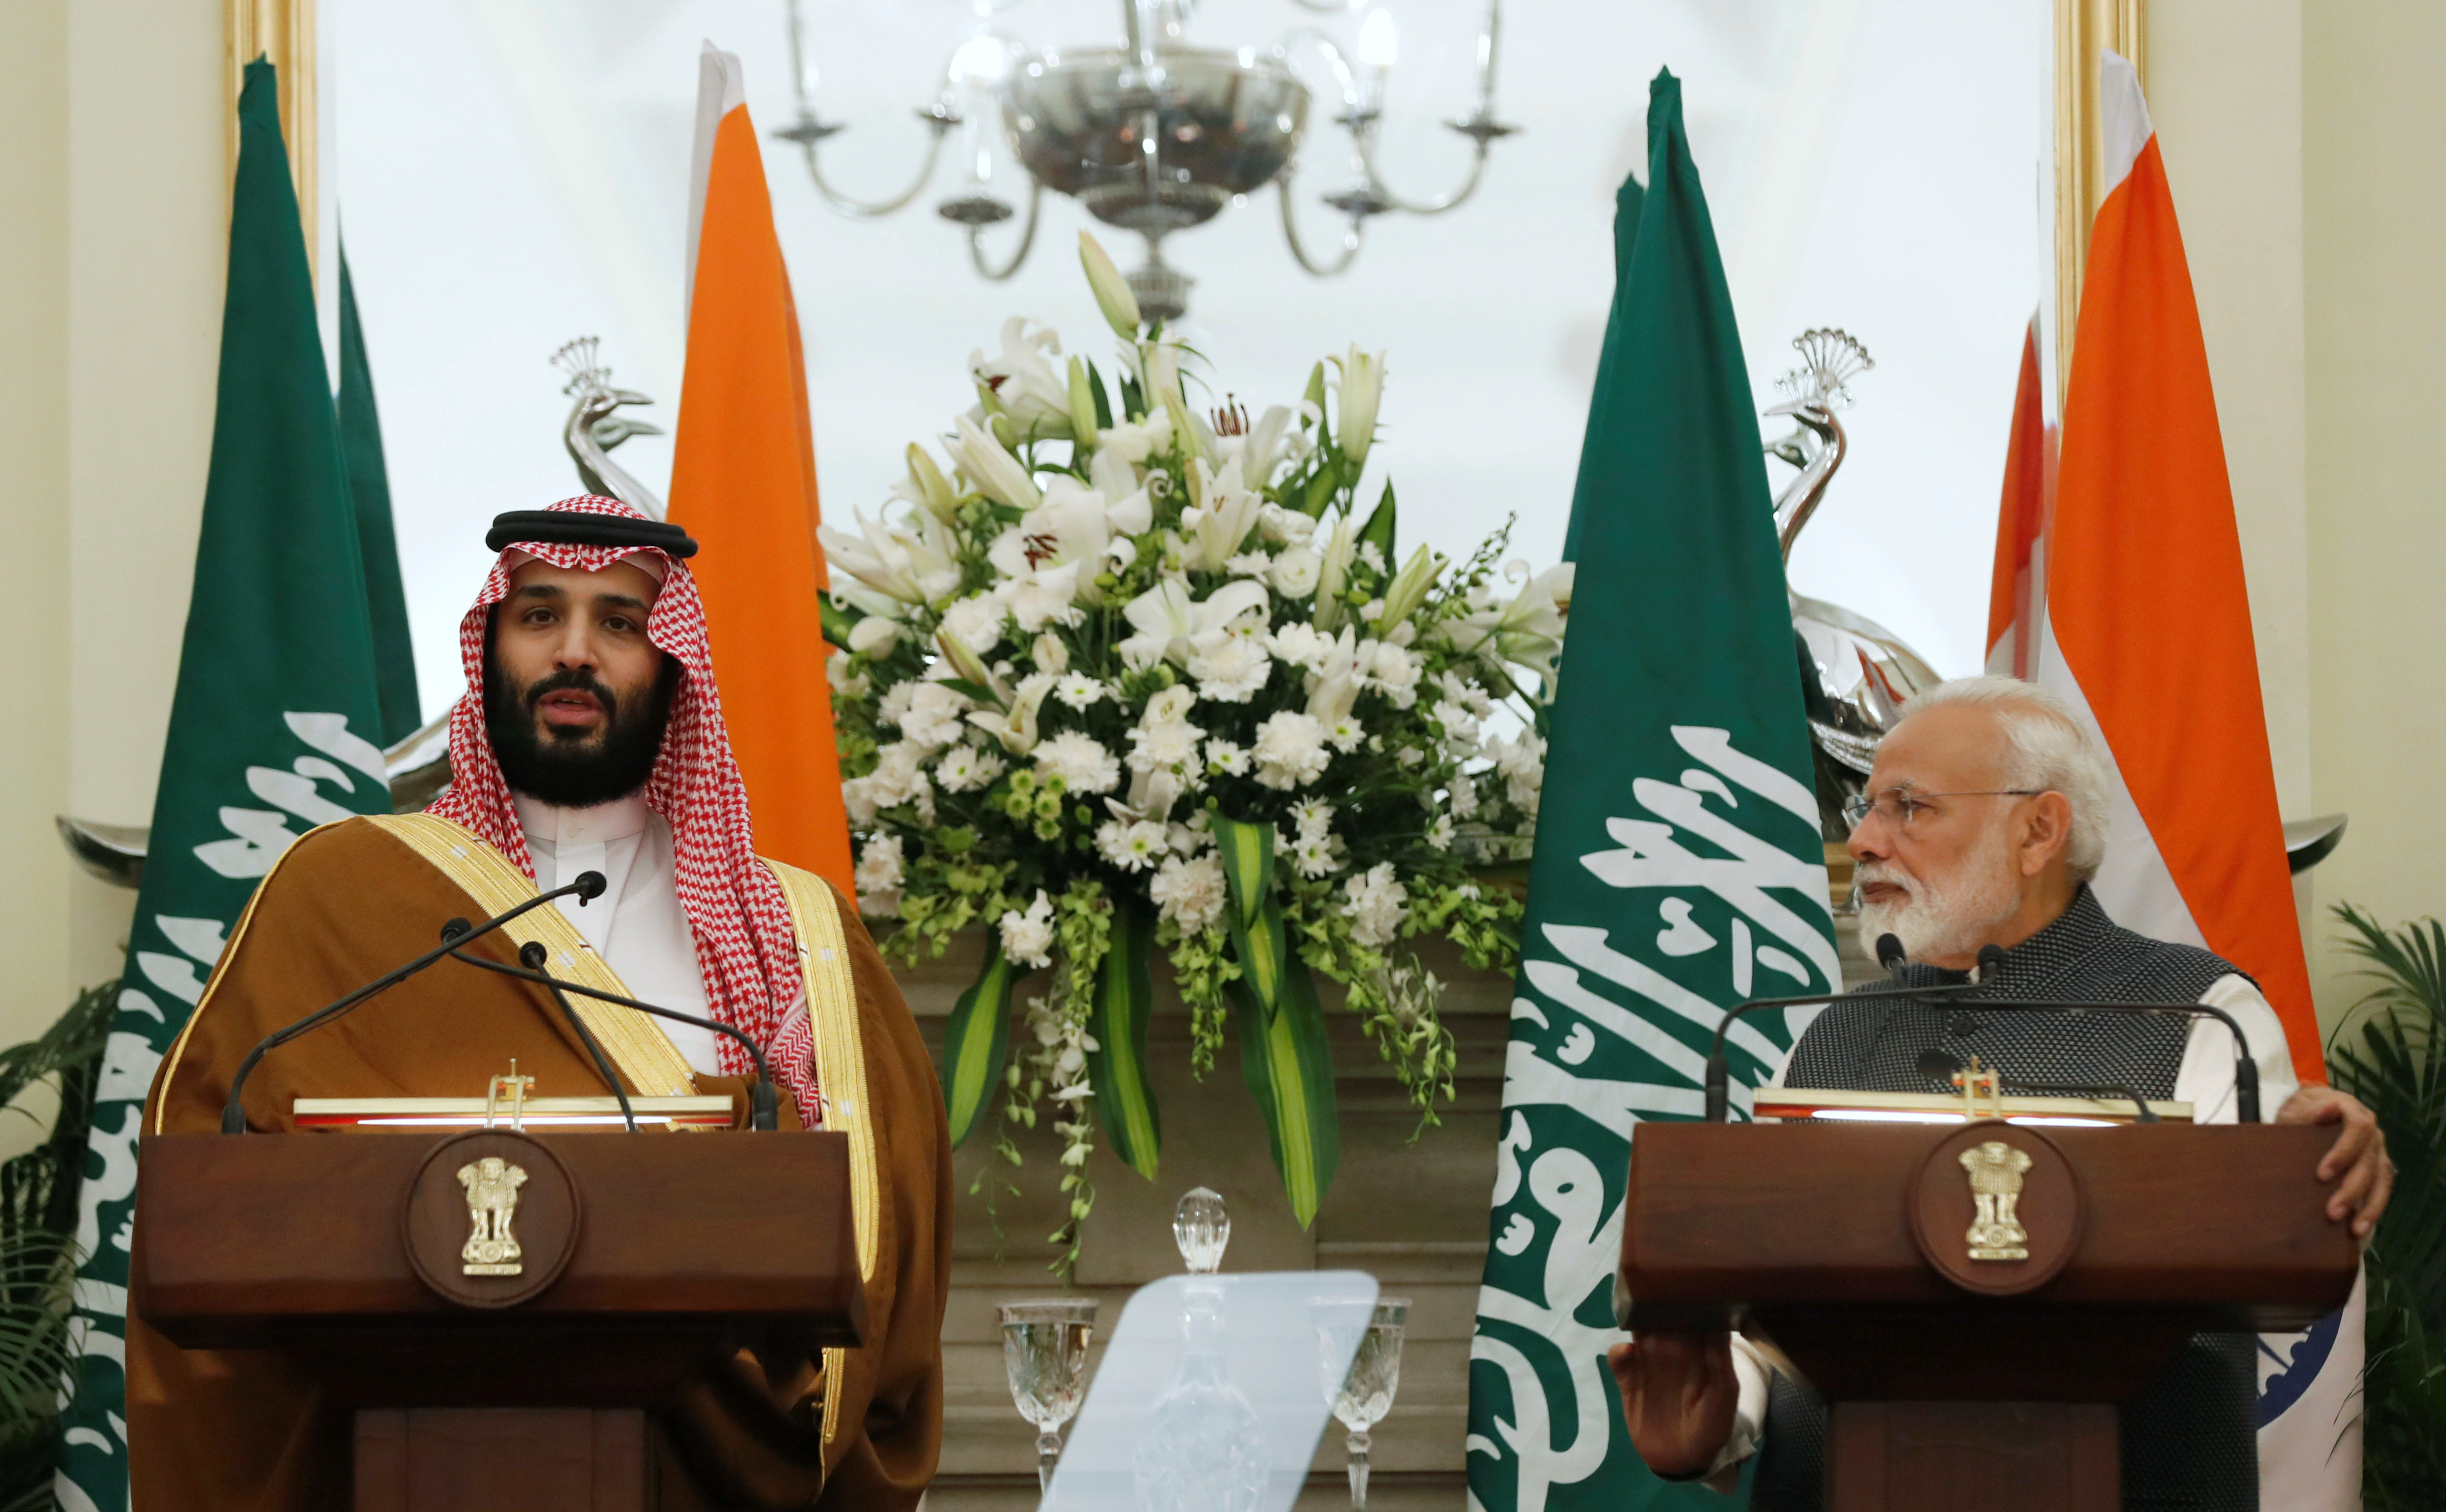 Saudi Arabia's Crown Prince Mohammed bin Salman speaks at a meeting with Indian Prime Minister Narendra Modi as he looks on, at Hyderabad House in New Delhi